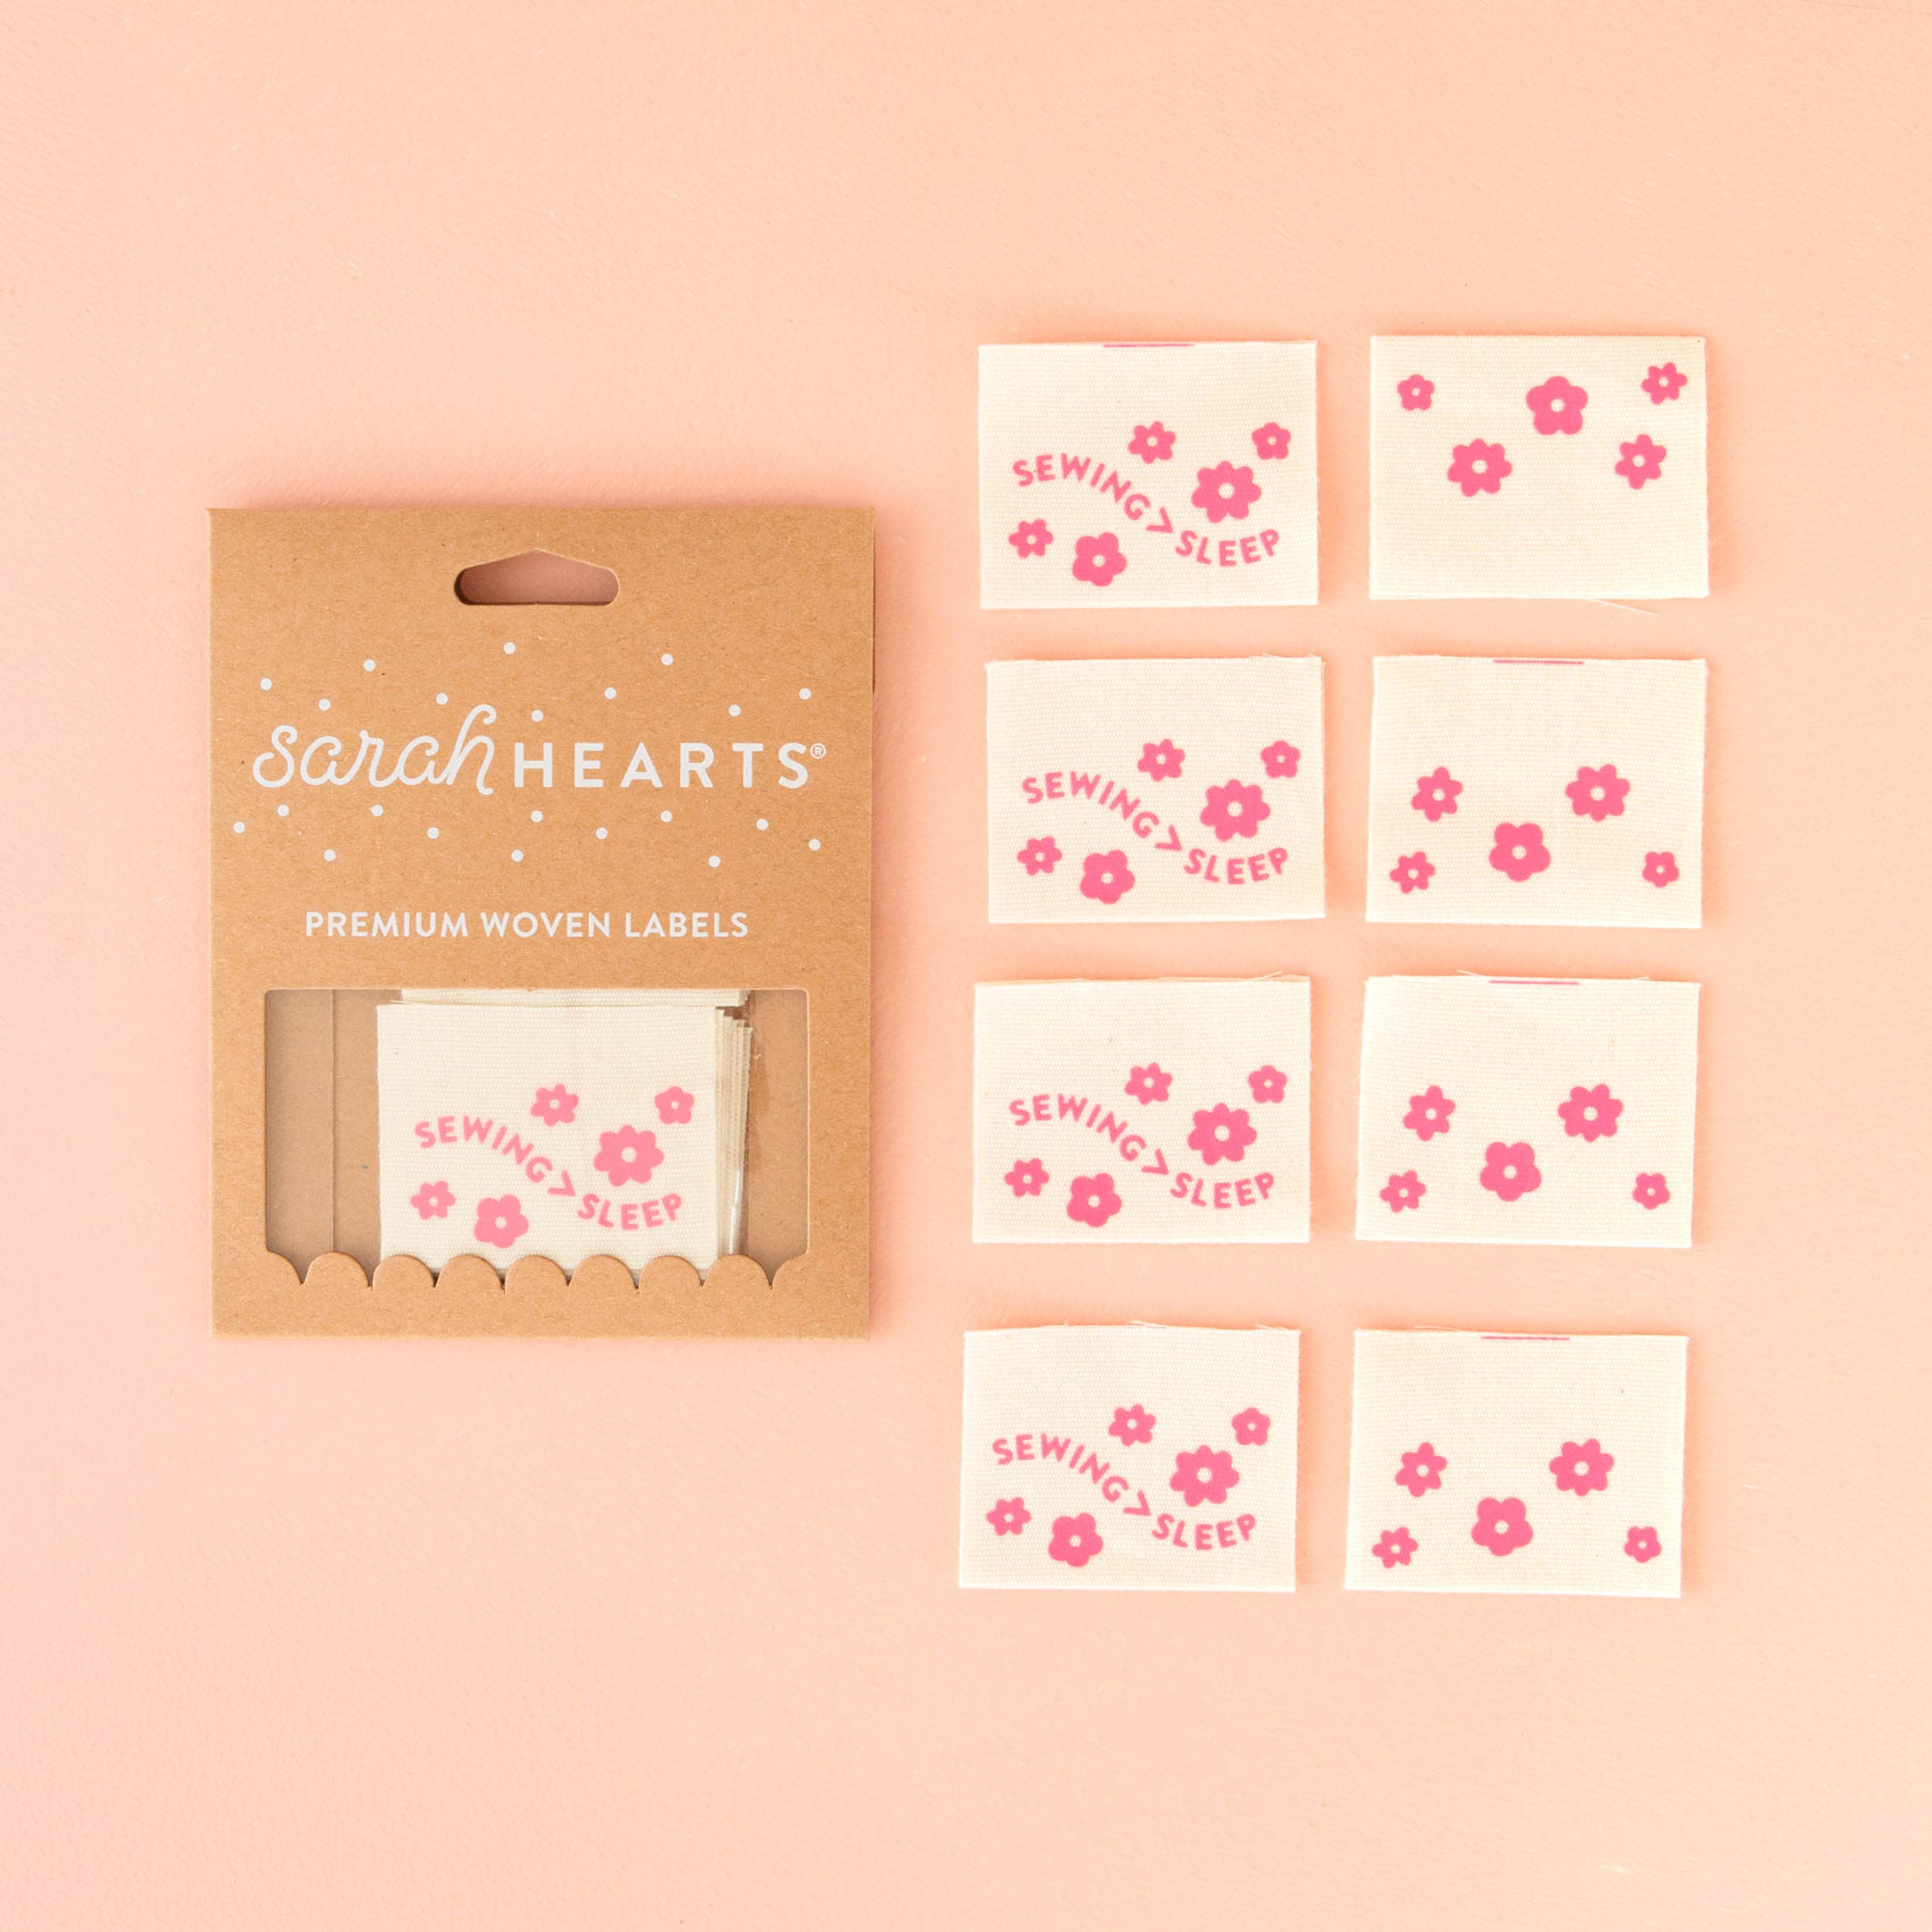 Sarah Hearts - Sewing > Sleep Pink Organic Cotton Labels - Sewing Tags –  Pretty Little Hedgehog